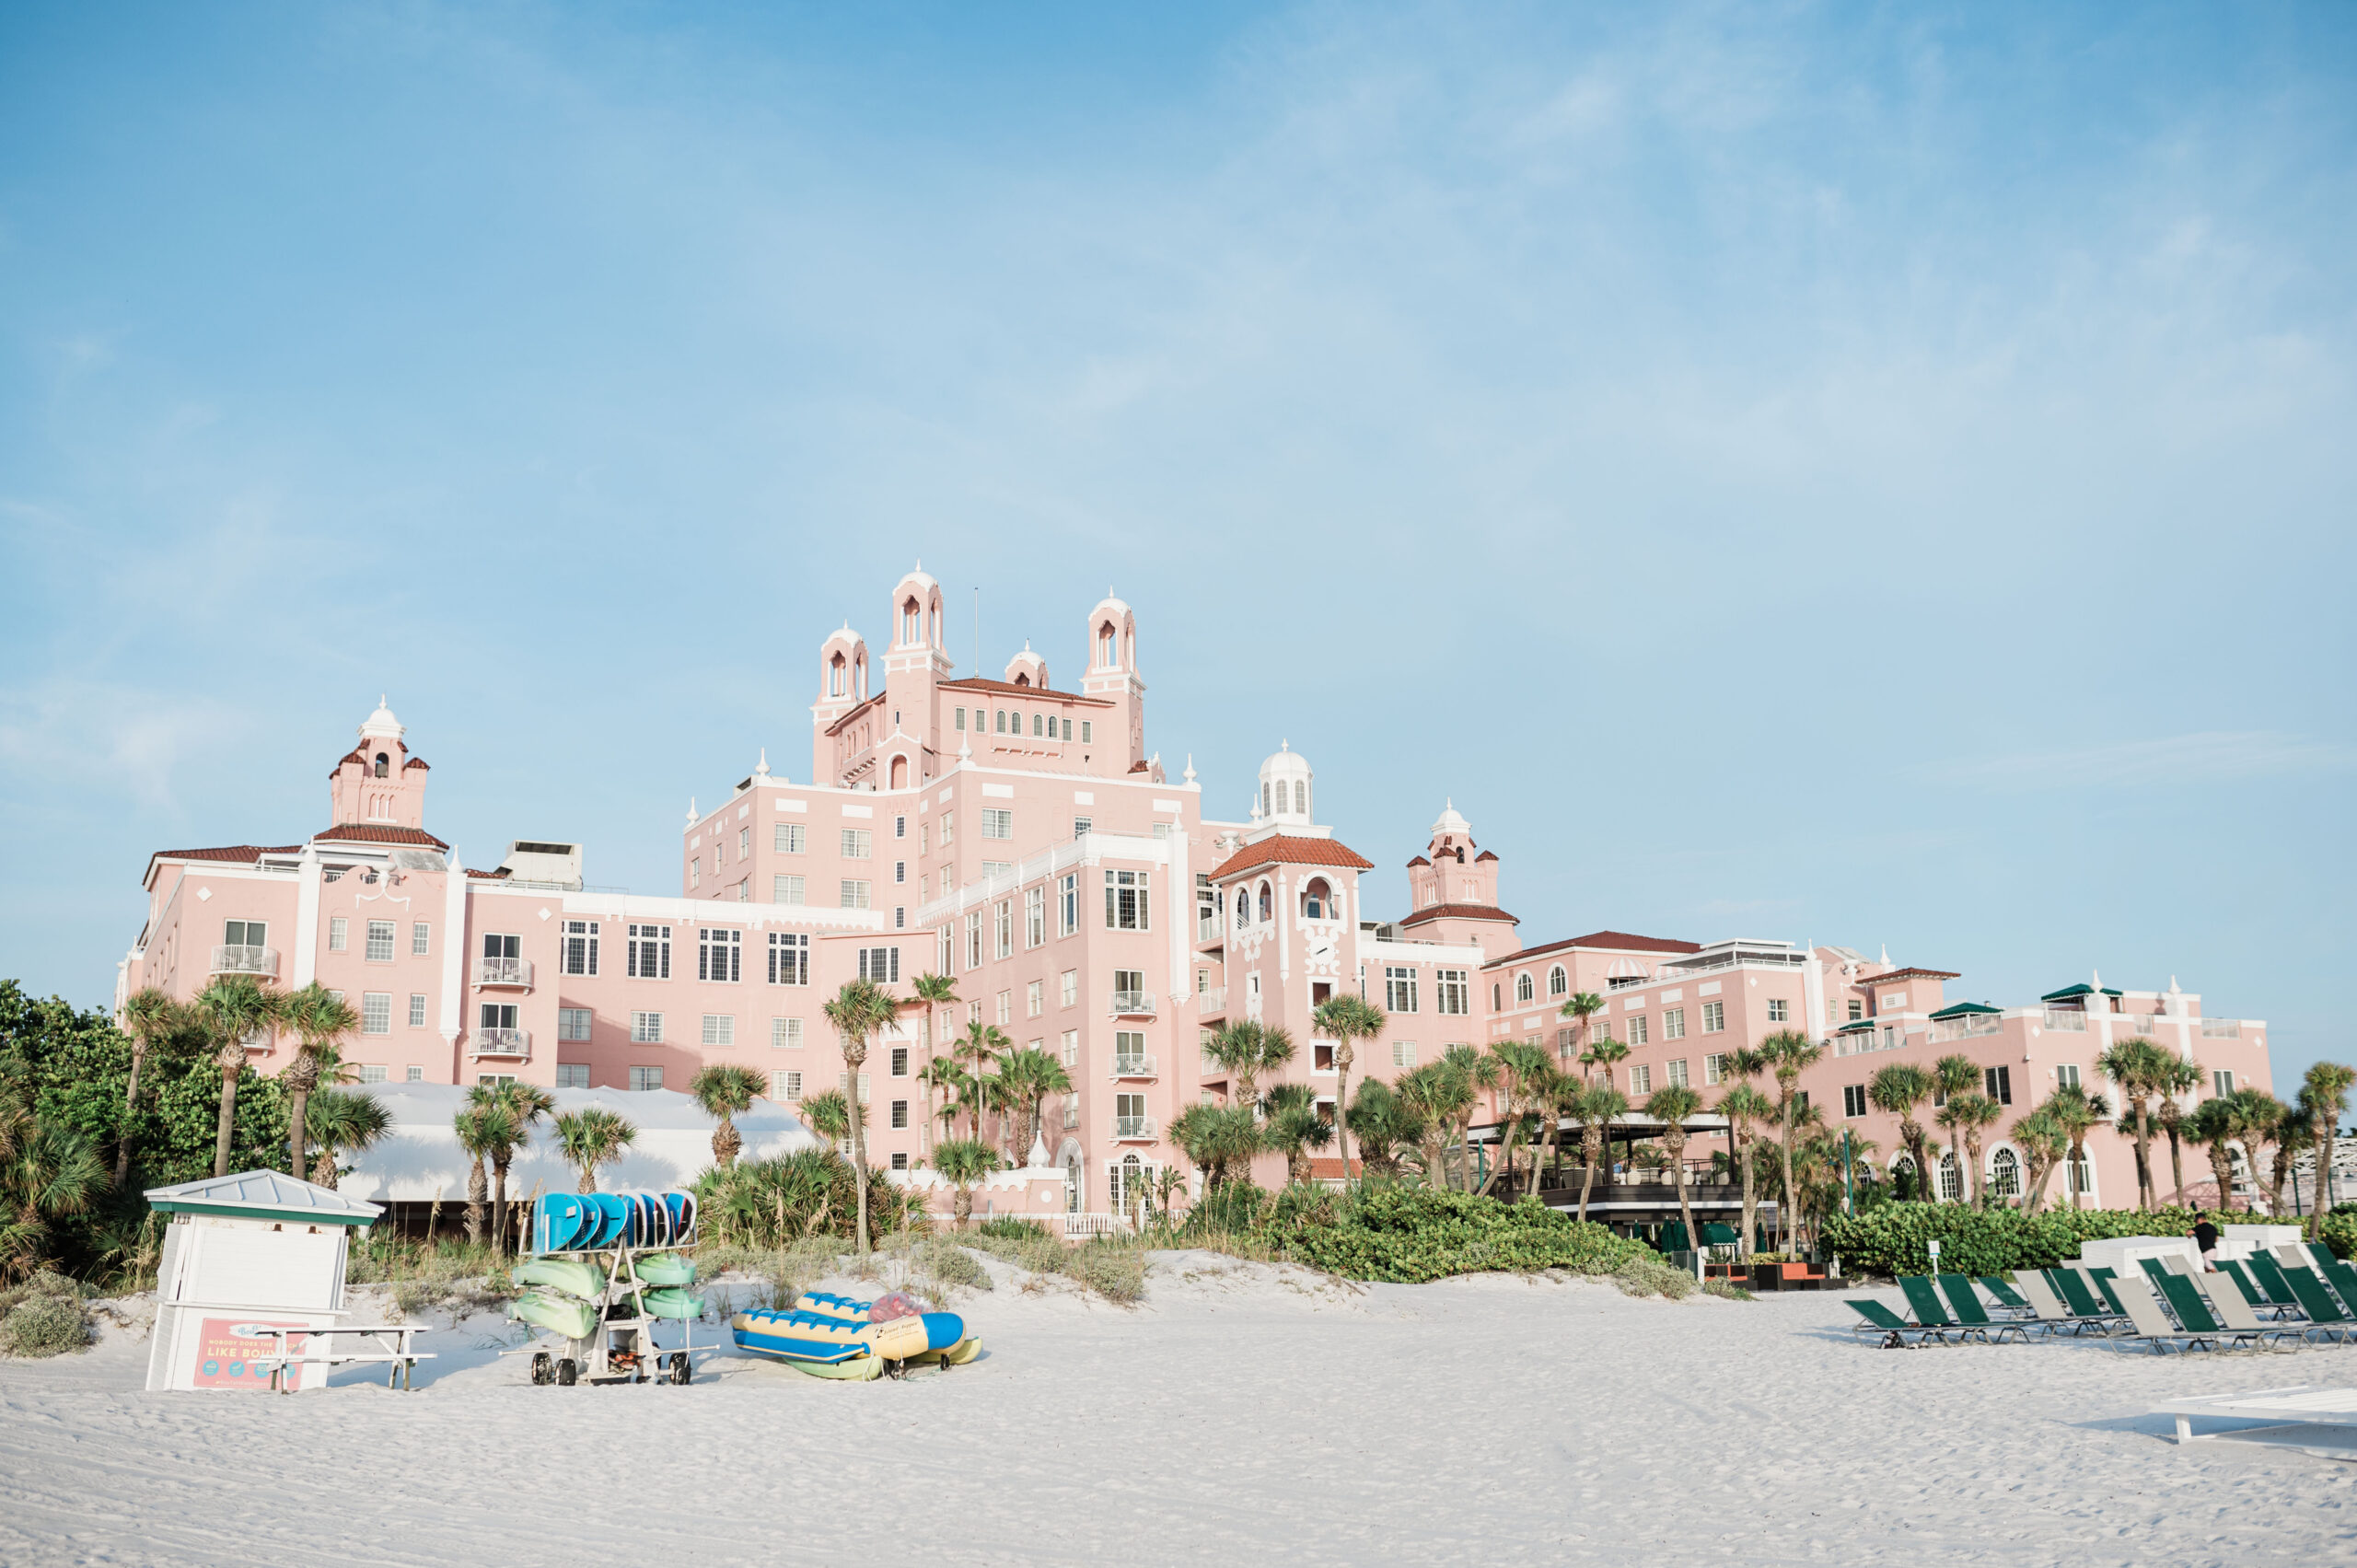 The Pink Palace, Don CeSar hotel view from the beach in Saint Pete with blue skies behind.